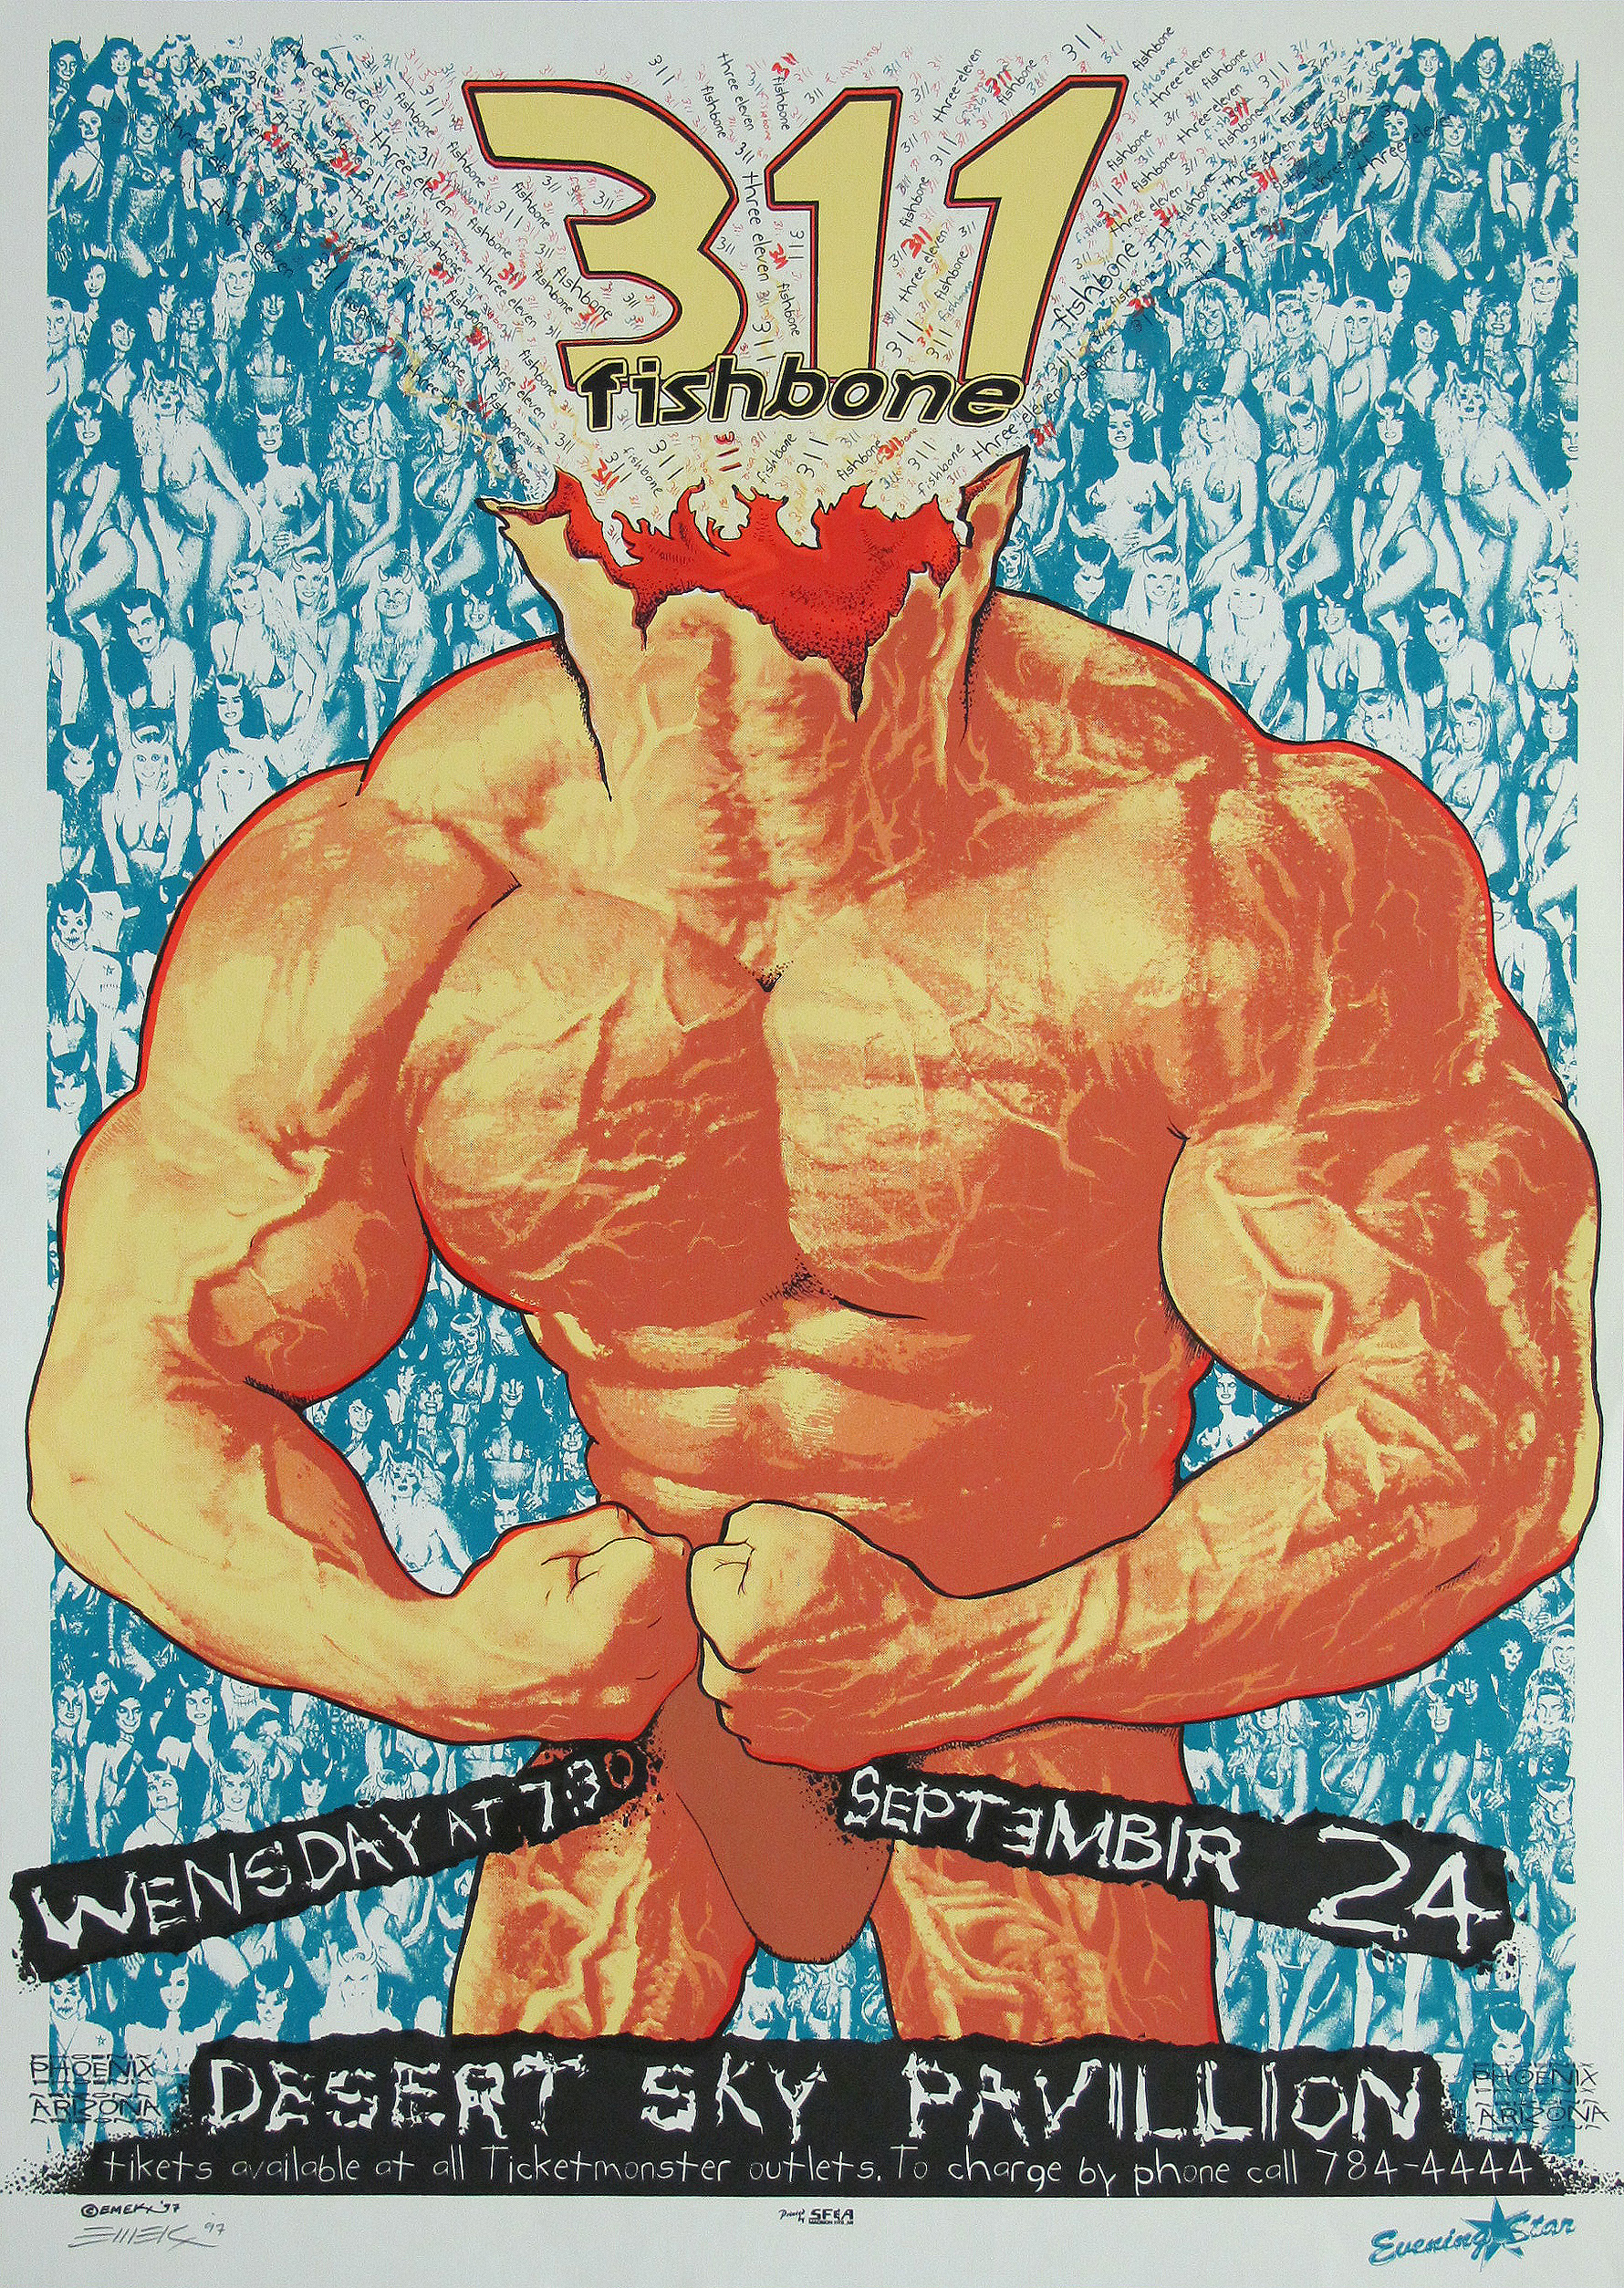 311 with Fishbone Concert Poster